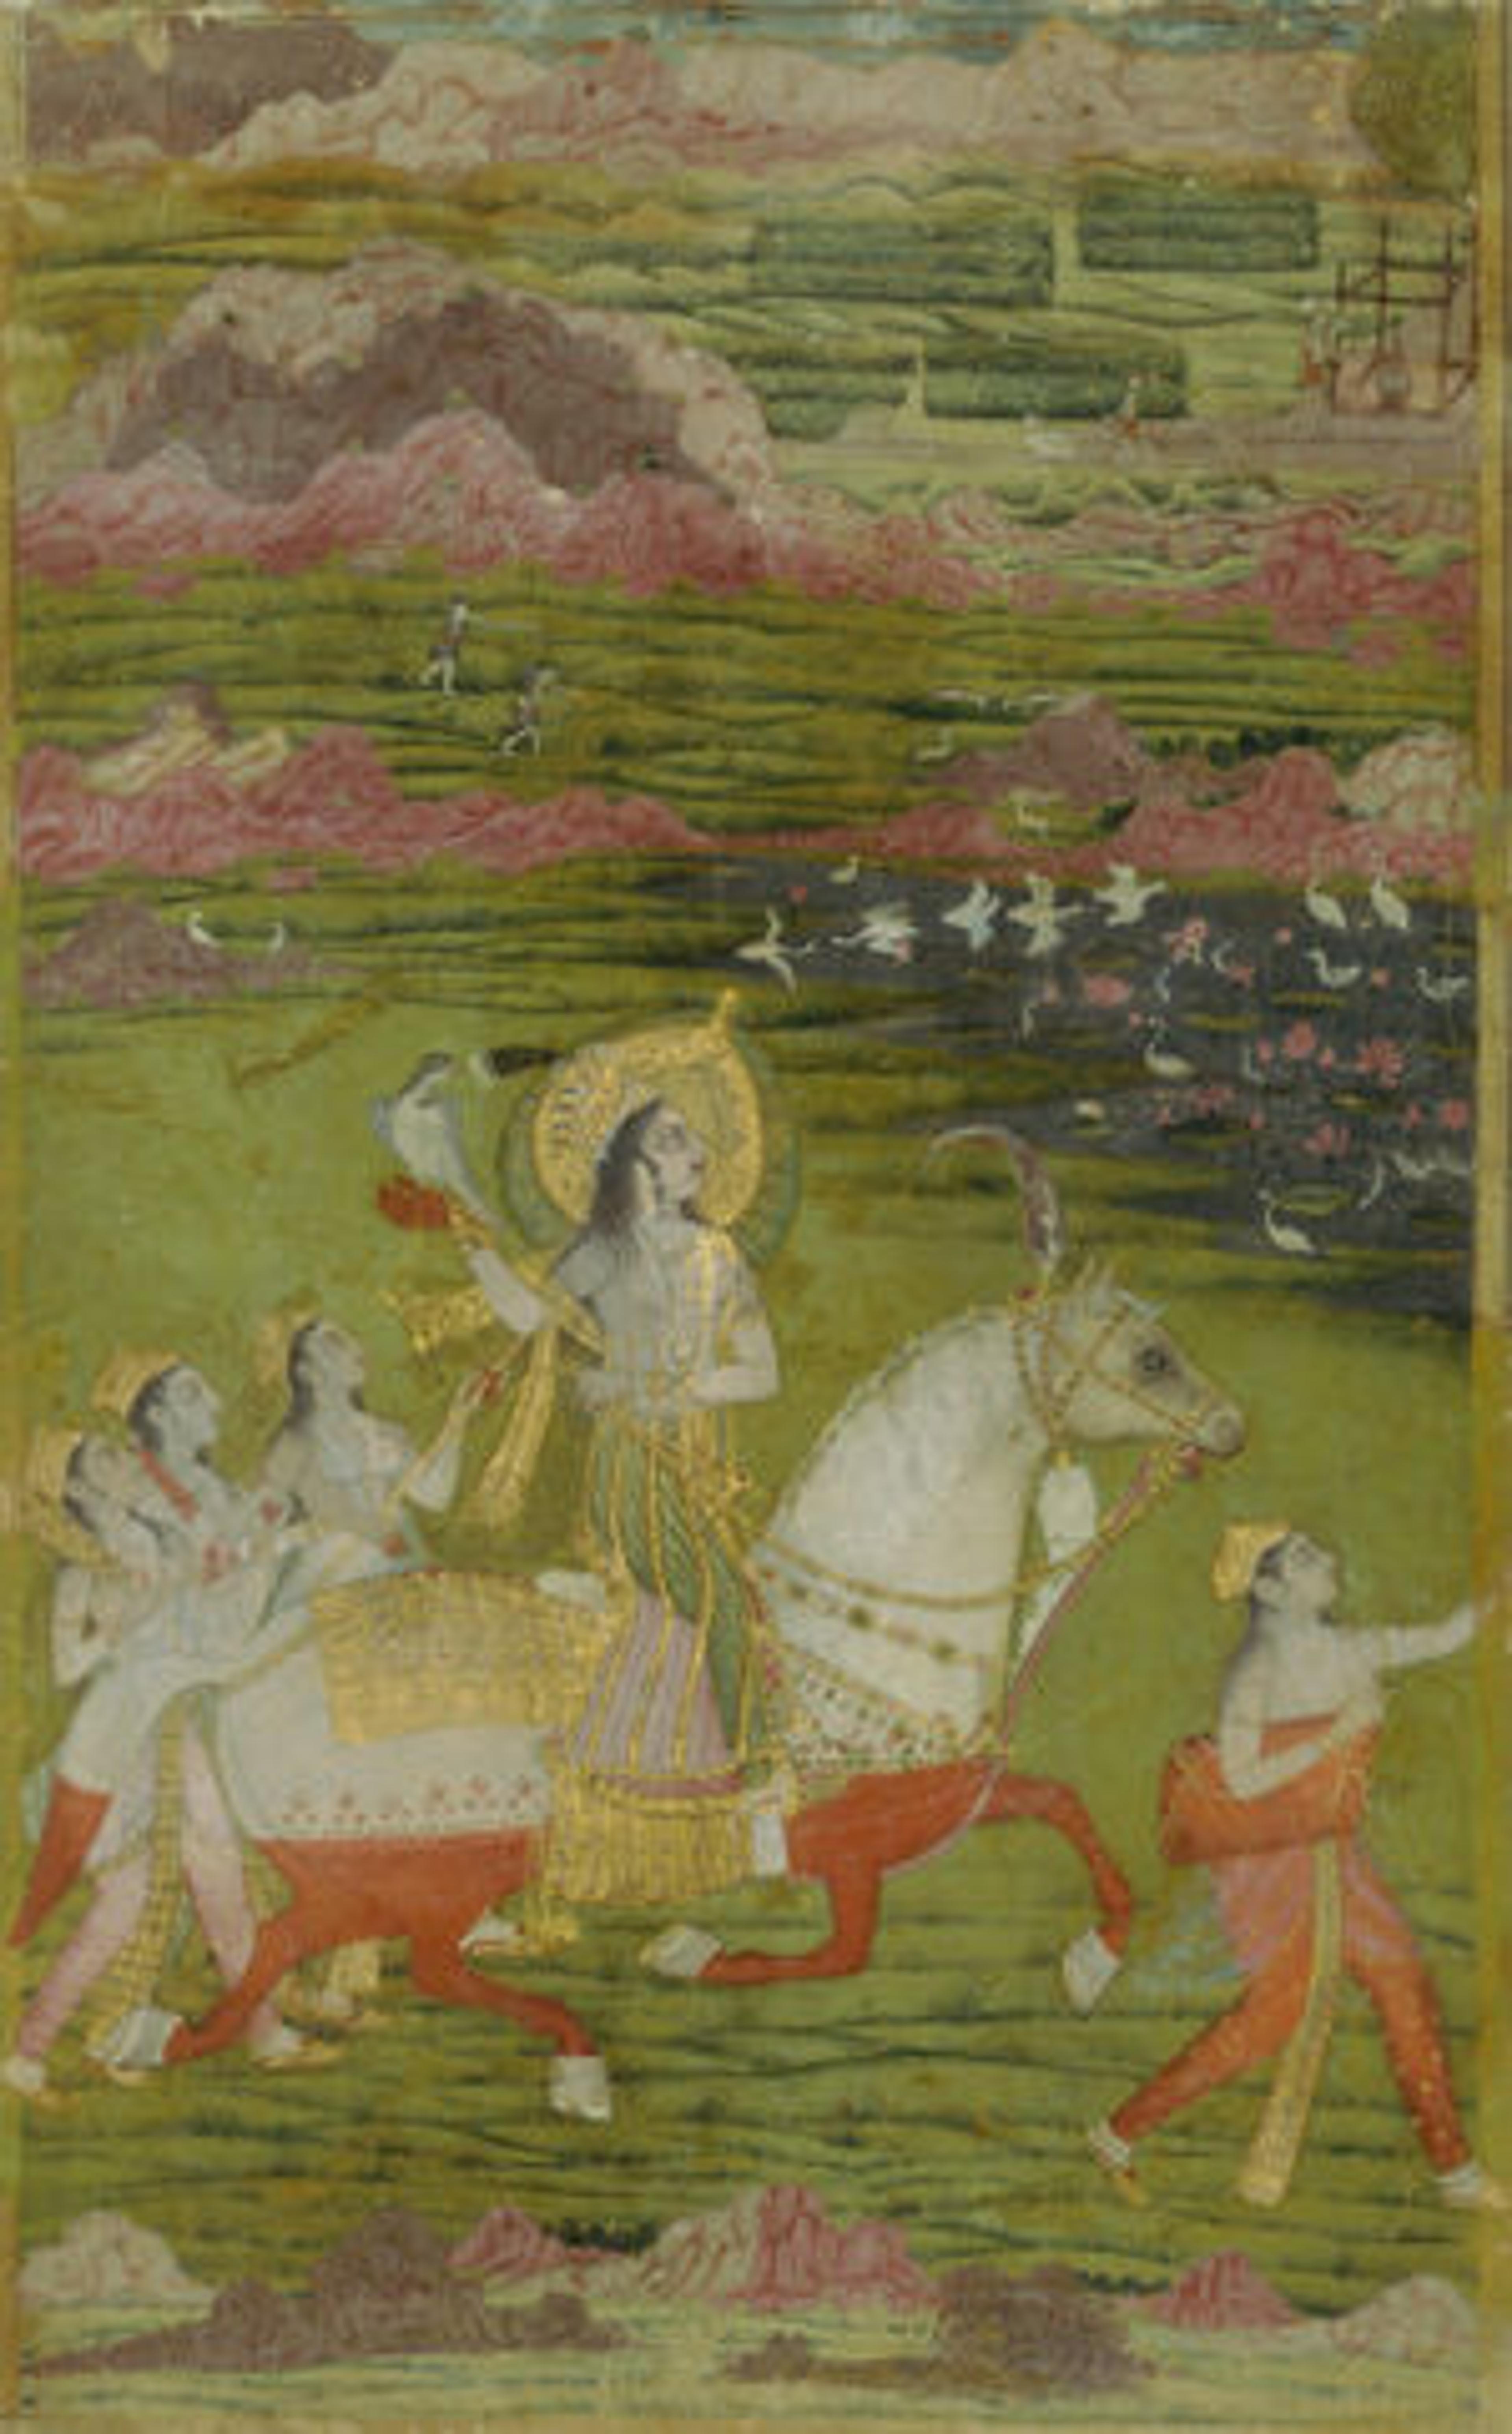 Chand Bibi Hawking with Attendants in a Landscape, ca. 1700. India, Deccan. Islamic. Opaque watercolors, gold, and silver on card-weight paper; 10 x 6 1/4 in. (25.4 x 15.9 cm). The Metropolitan Museum of Art, New York, Louis E. and Theresa S. Seley Purchase Fund for Islamic Art, 1999 (1999.403)